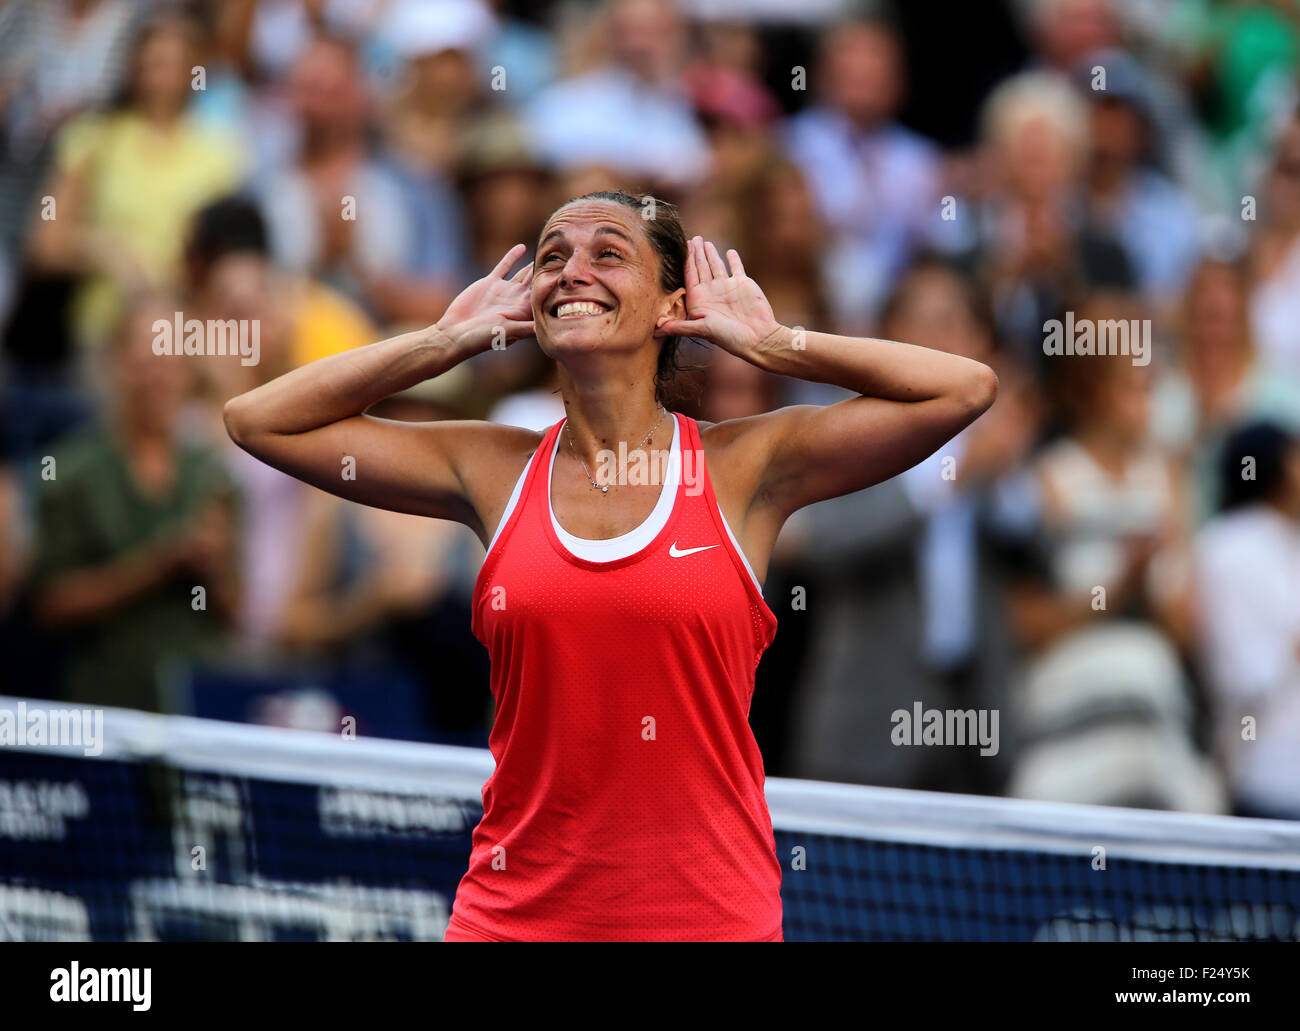 Flushings Meadow, New York, USA. 11th Sep, 2015. Roberta Vinci of Italy listens to the roar of the crowd after defeating Serena Williams in their semifinal match at the U.S. Open in Flushing Meadows, New York on the afternoon of September 11th, 2015. Vinci won the match 2-6, 6-4, 6-4. Credit:  Adam Stoltman/Alamy Live News Stock Photo